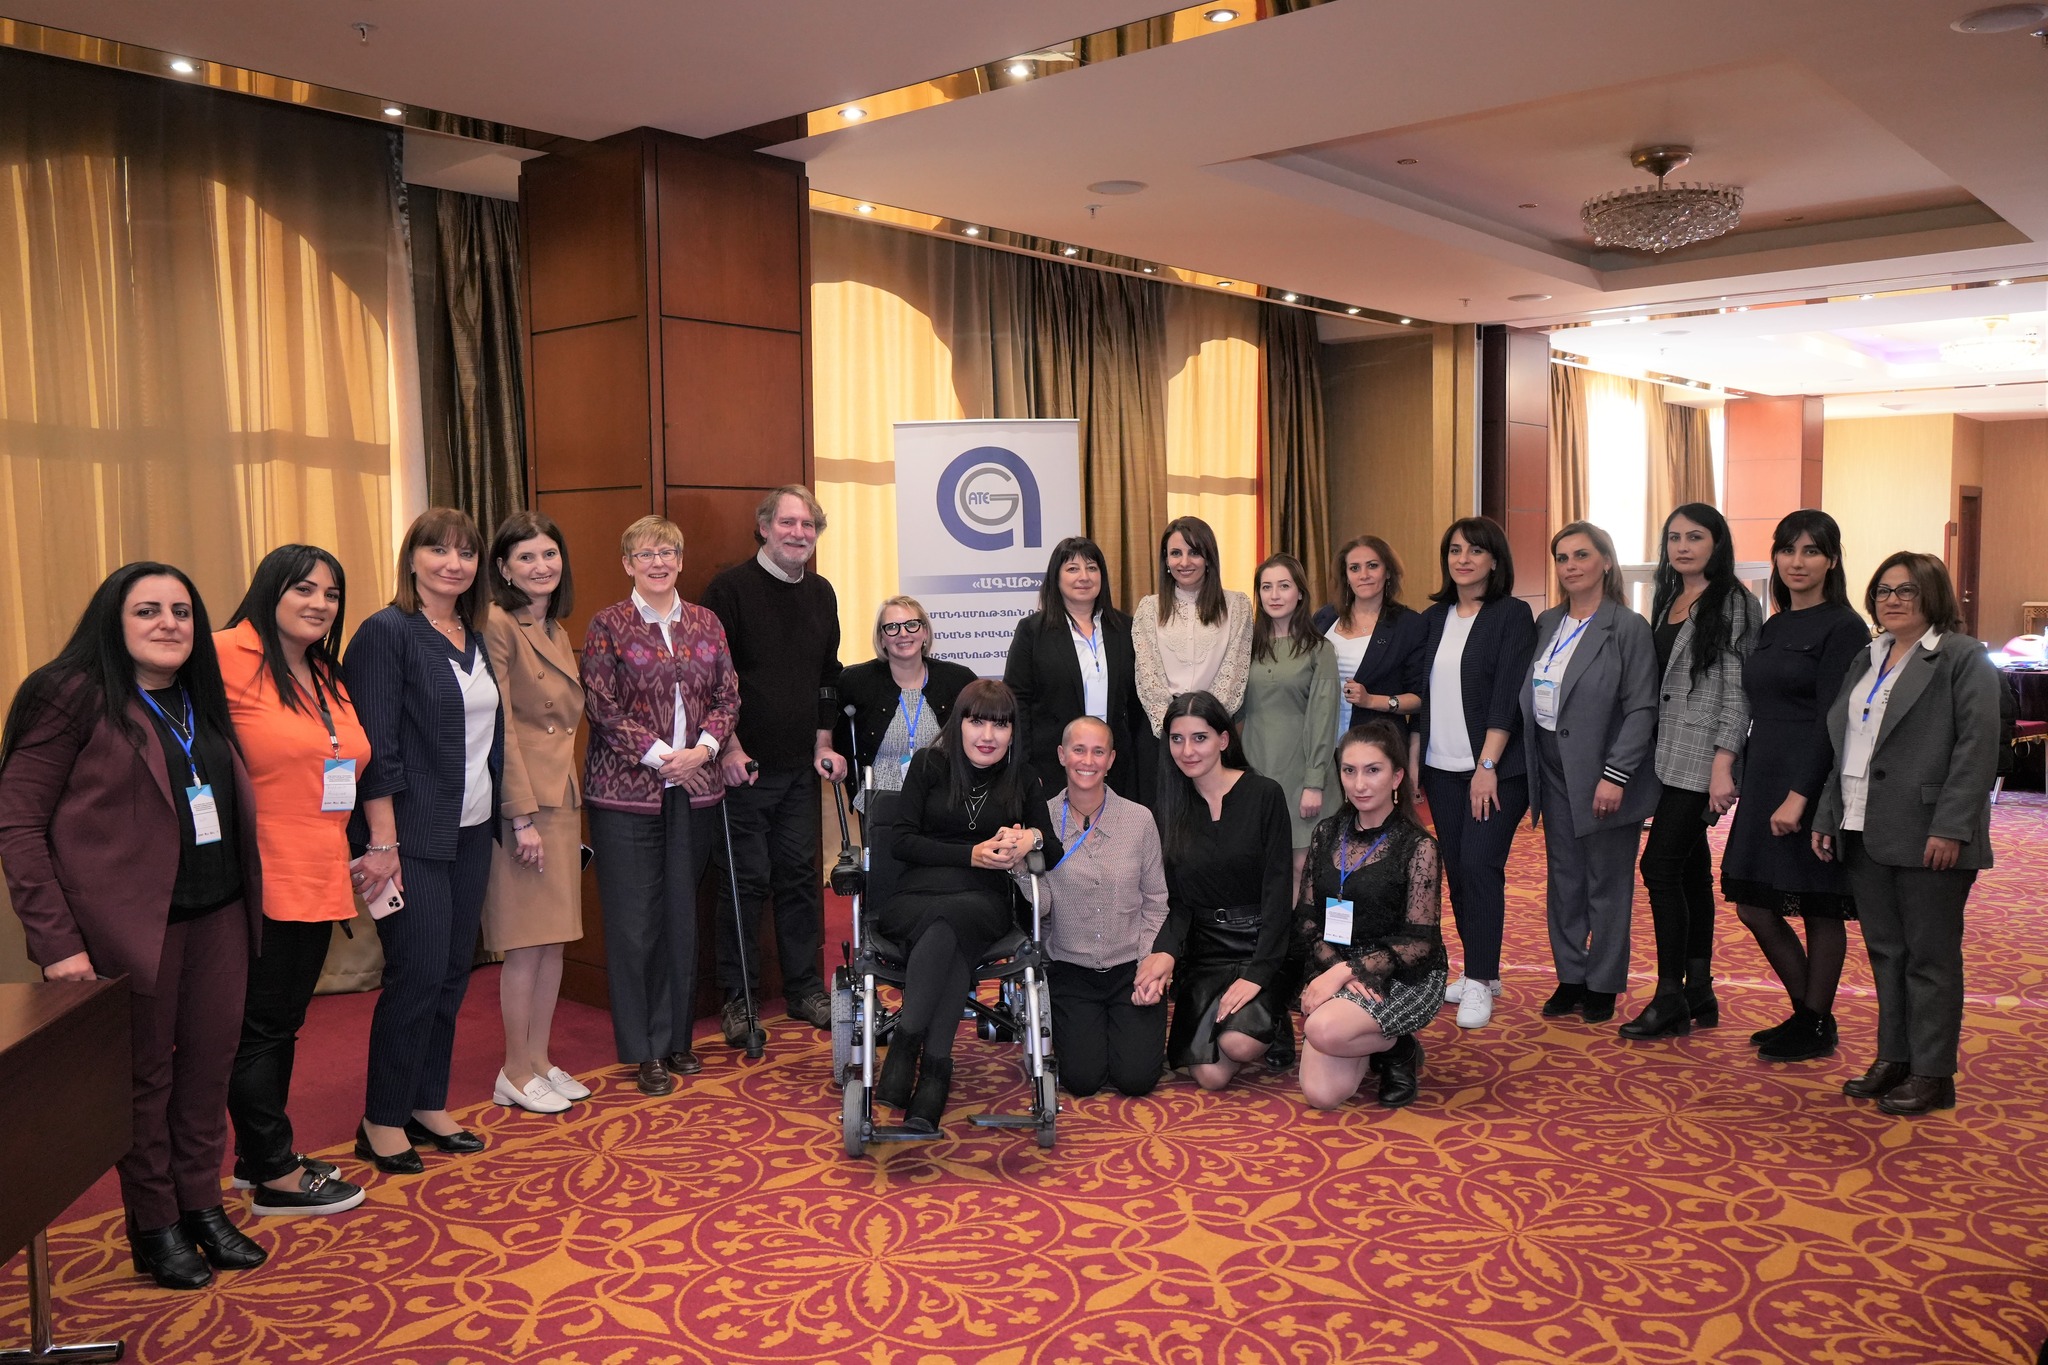 Kimberly, standing with her crutches, surrounded by members of the Armenia Independent Living movement, smiling to the camera.